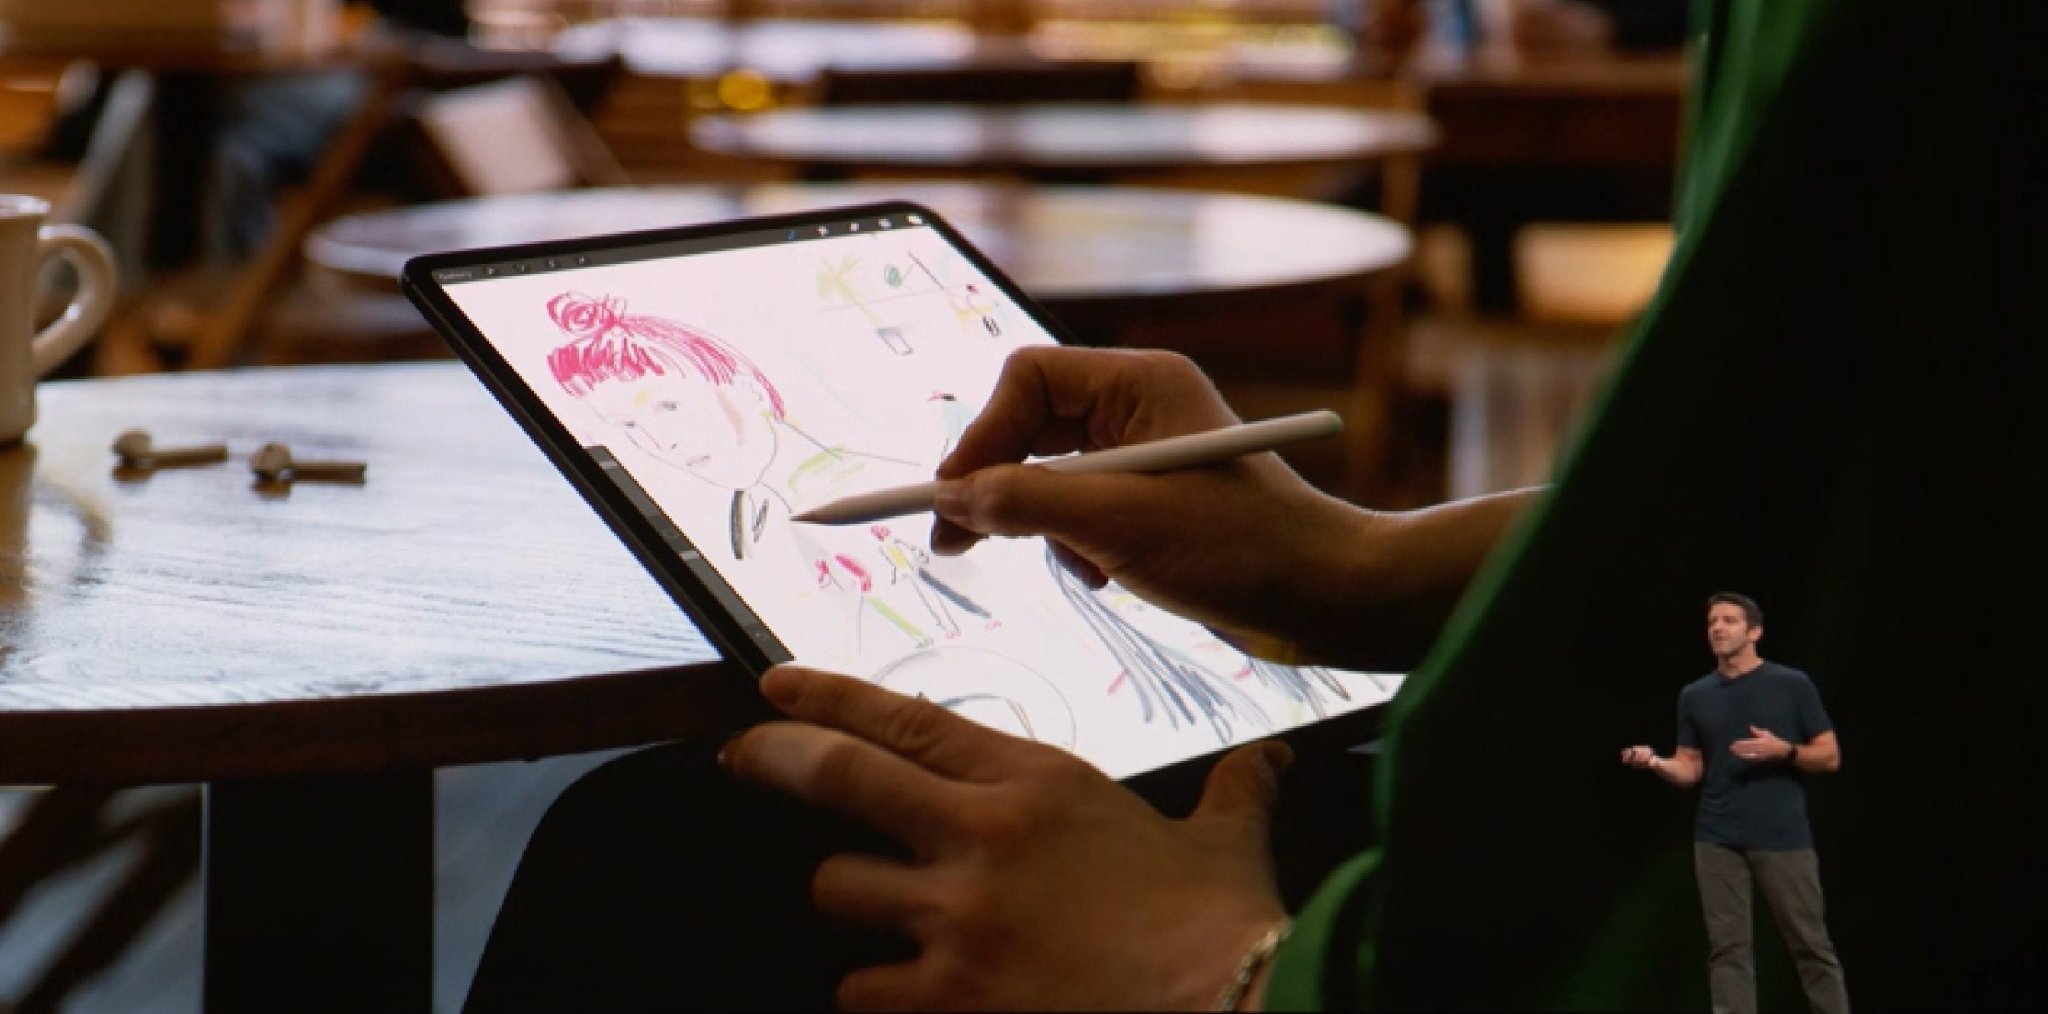 The Apple Pencil gets a rare price drop in Amazon's Black Friday sale